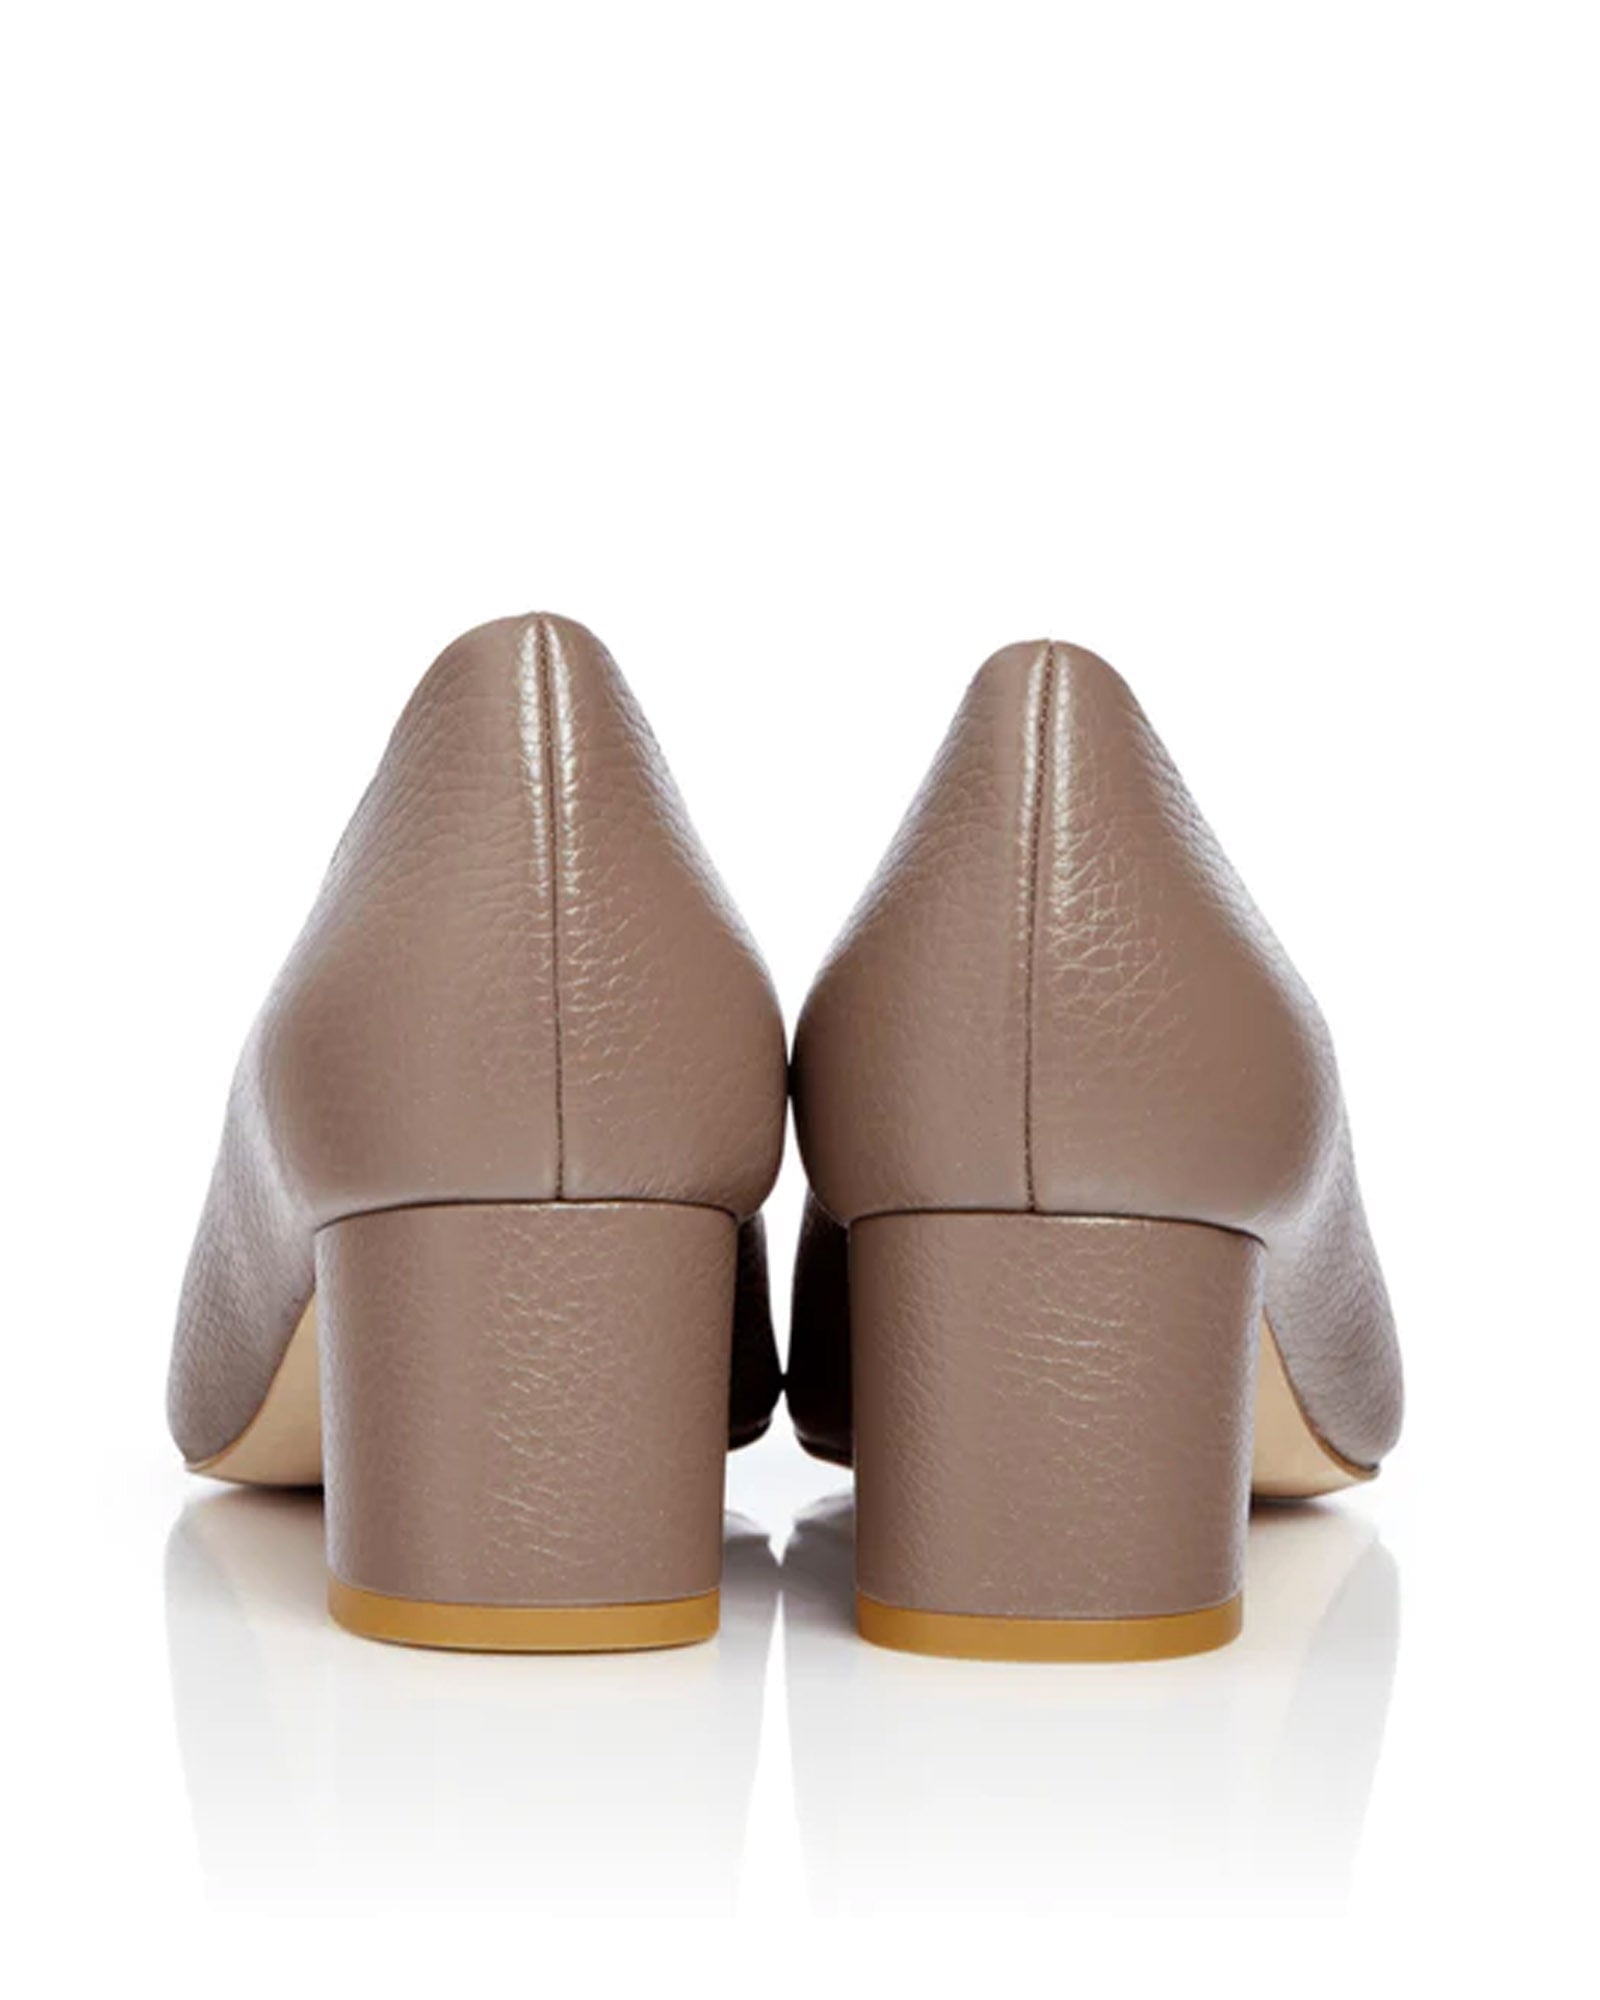 Josie Kitten Textured Taupe Leather Fashion Shoe Pointed Block Heel Court Shoes  image